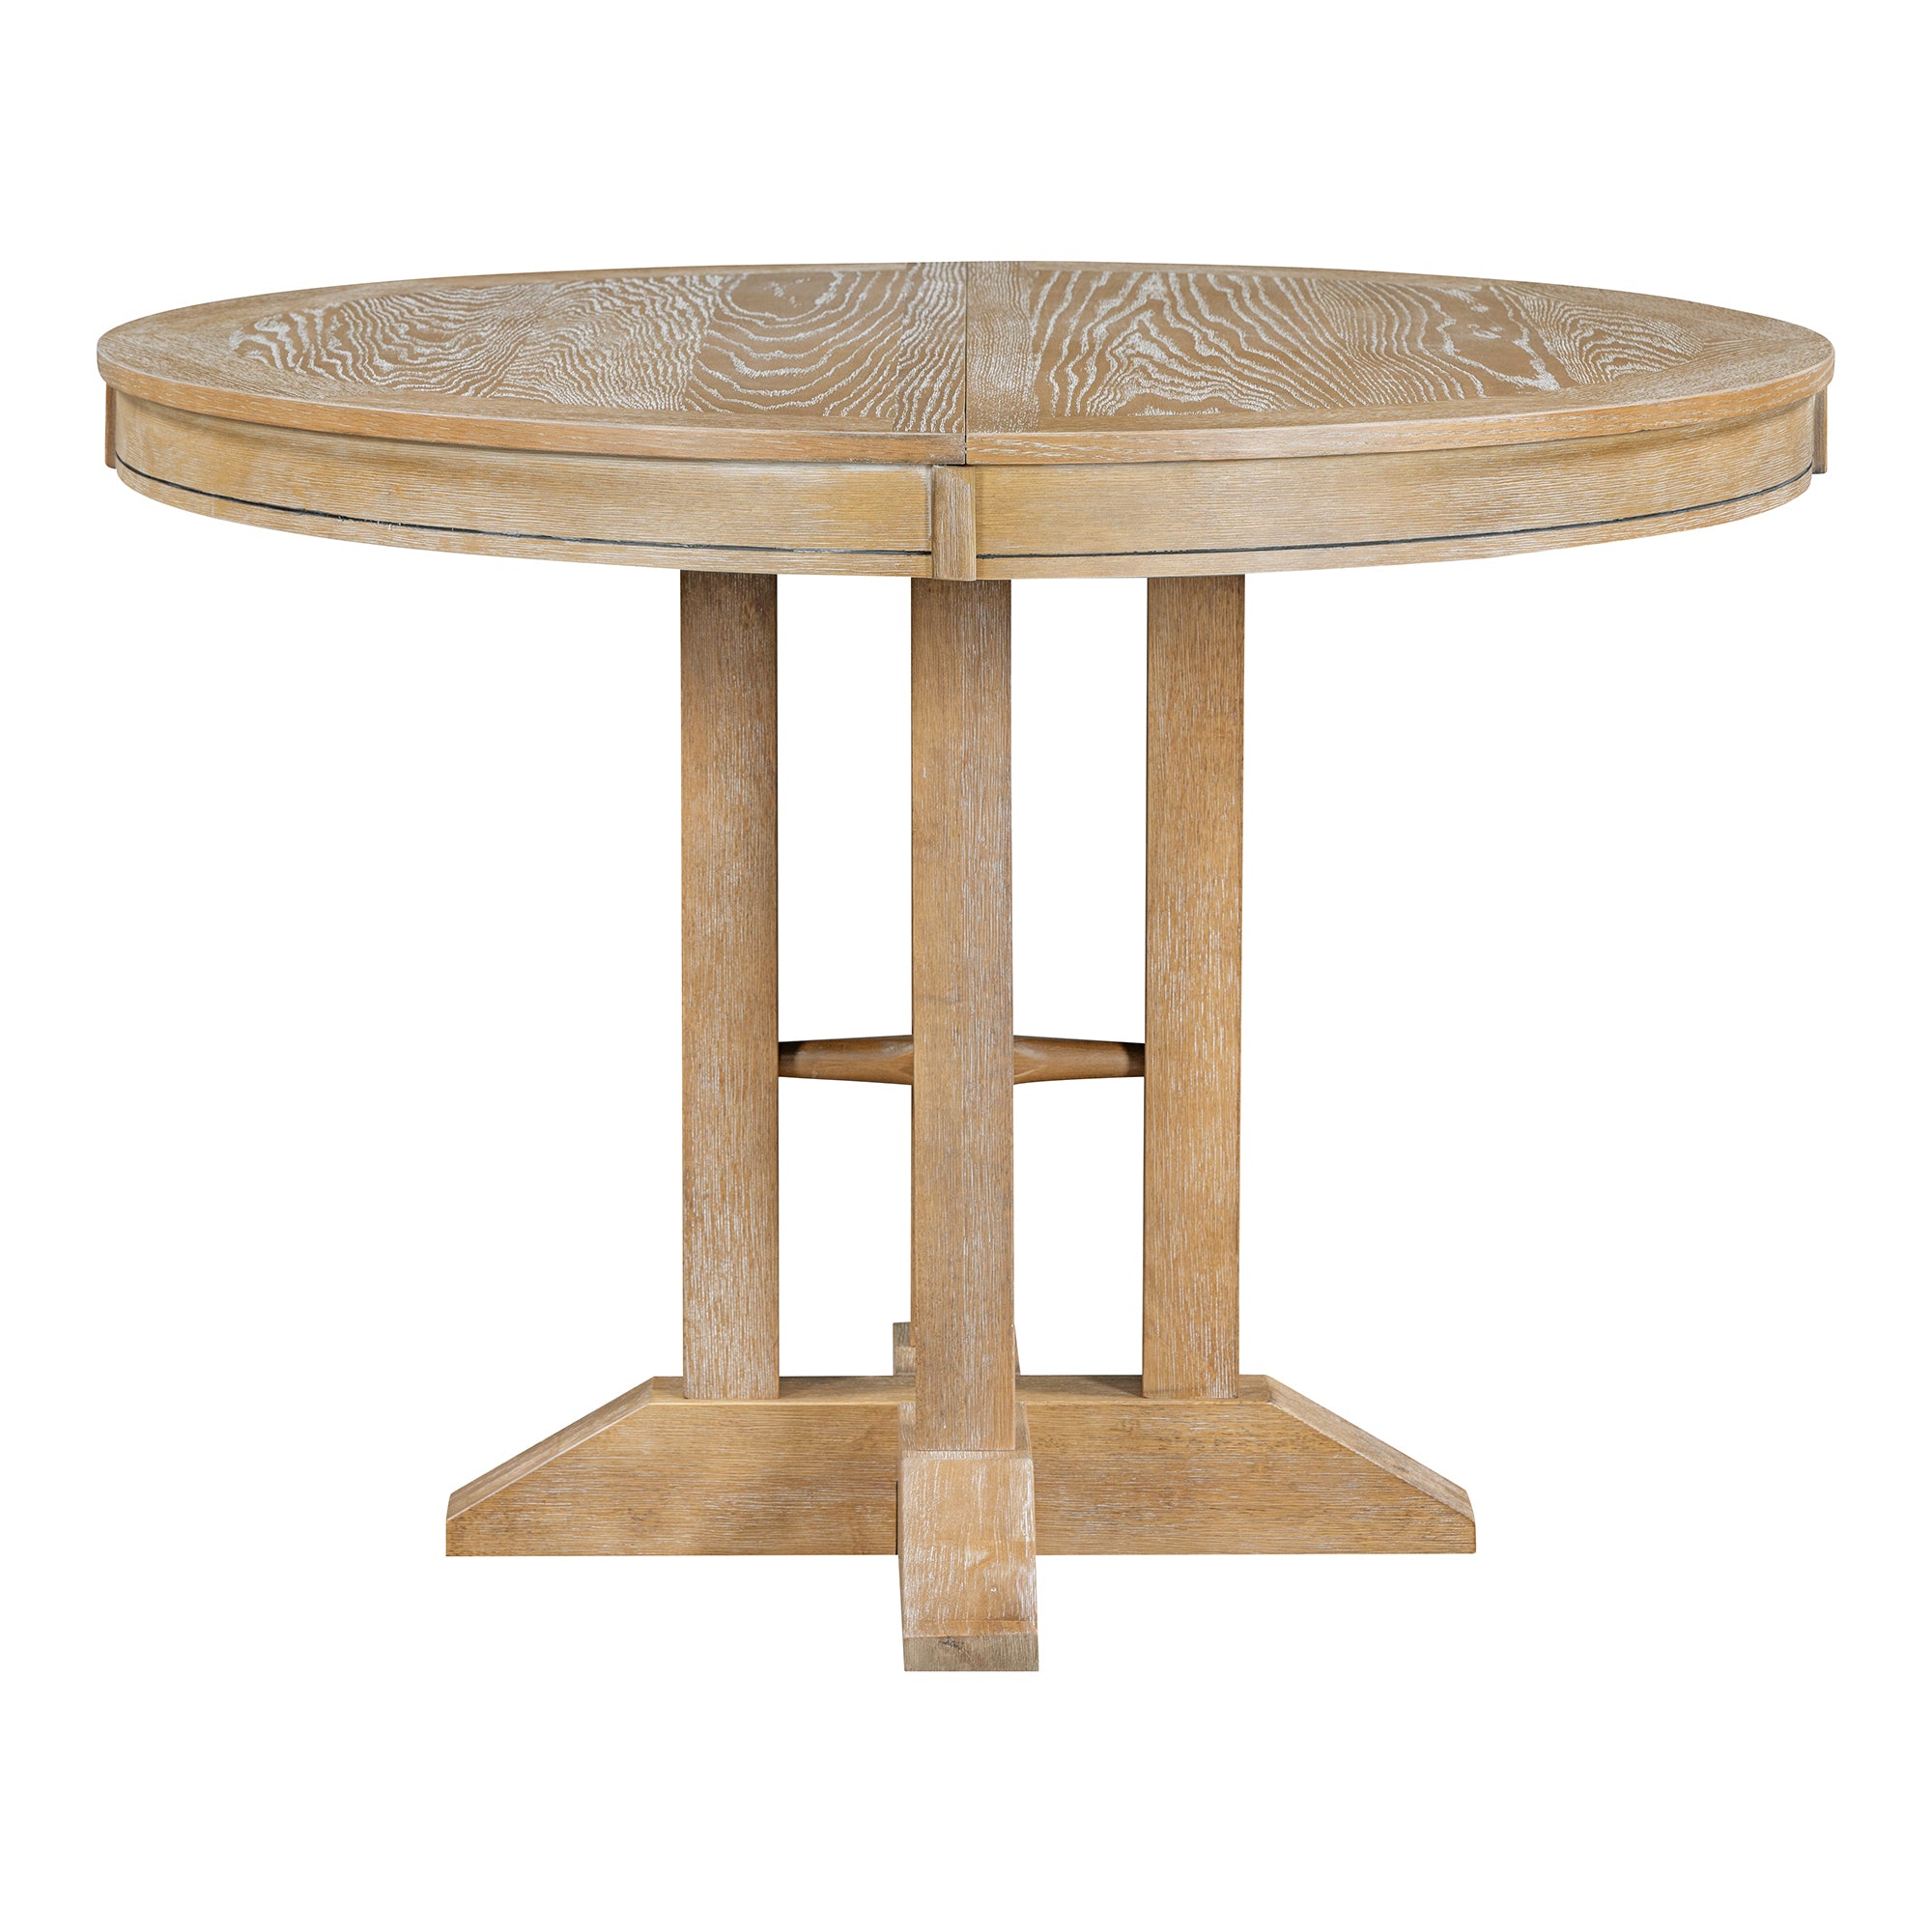 Farmhouse Dining Table Extendable Round Table for Dining Room - Natural Wood Wash